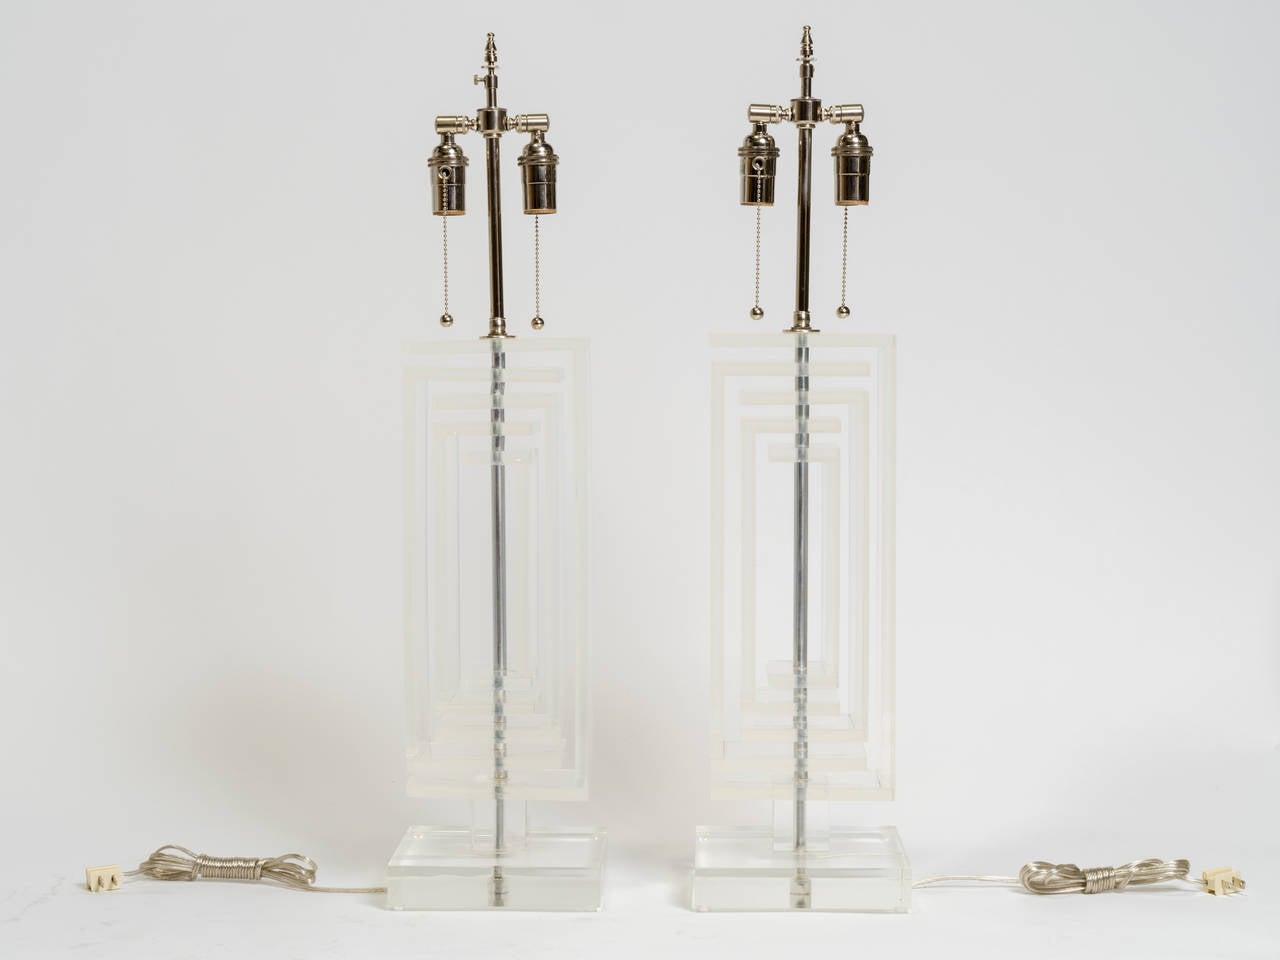 Pair of modern geometric lamps.
Professionally rewired with new adjustable double pull chain sockets.